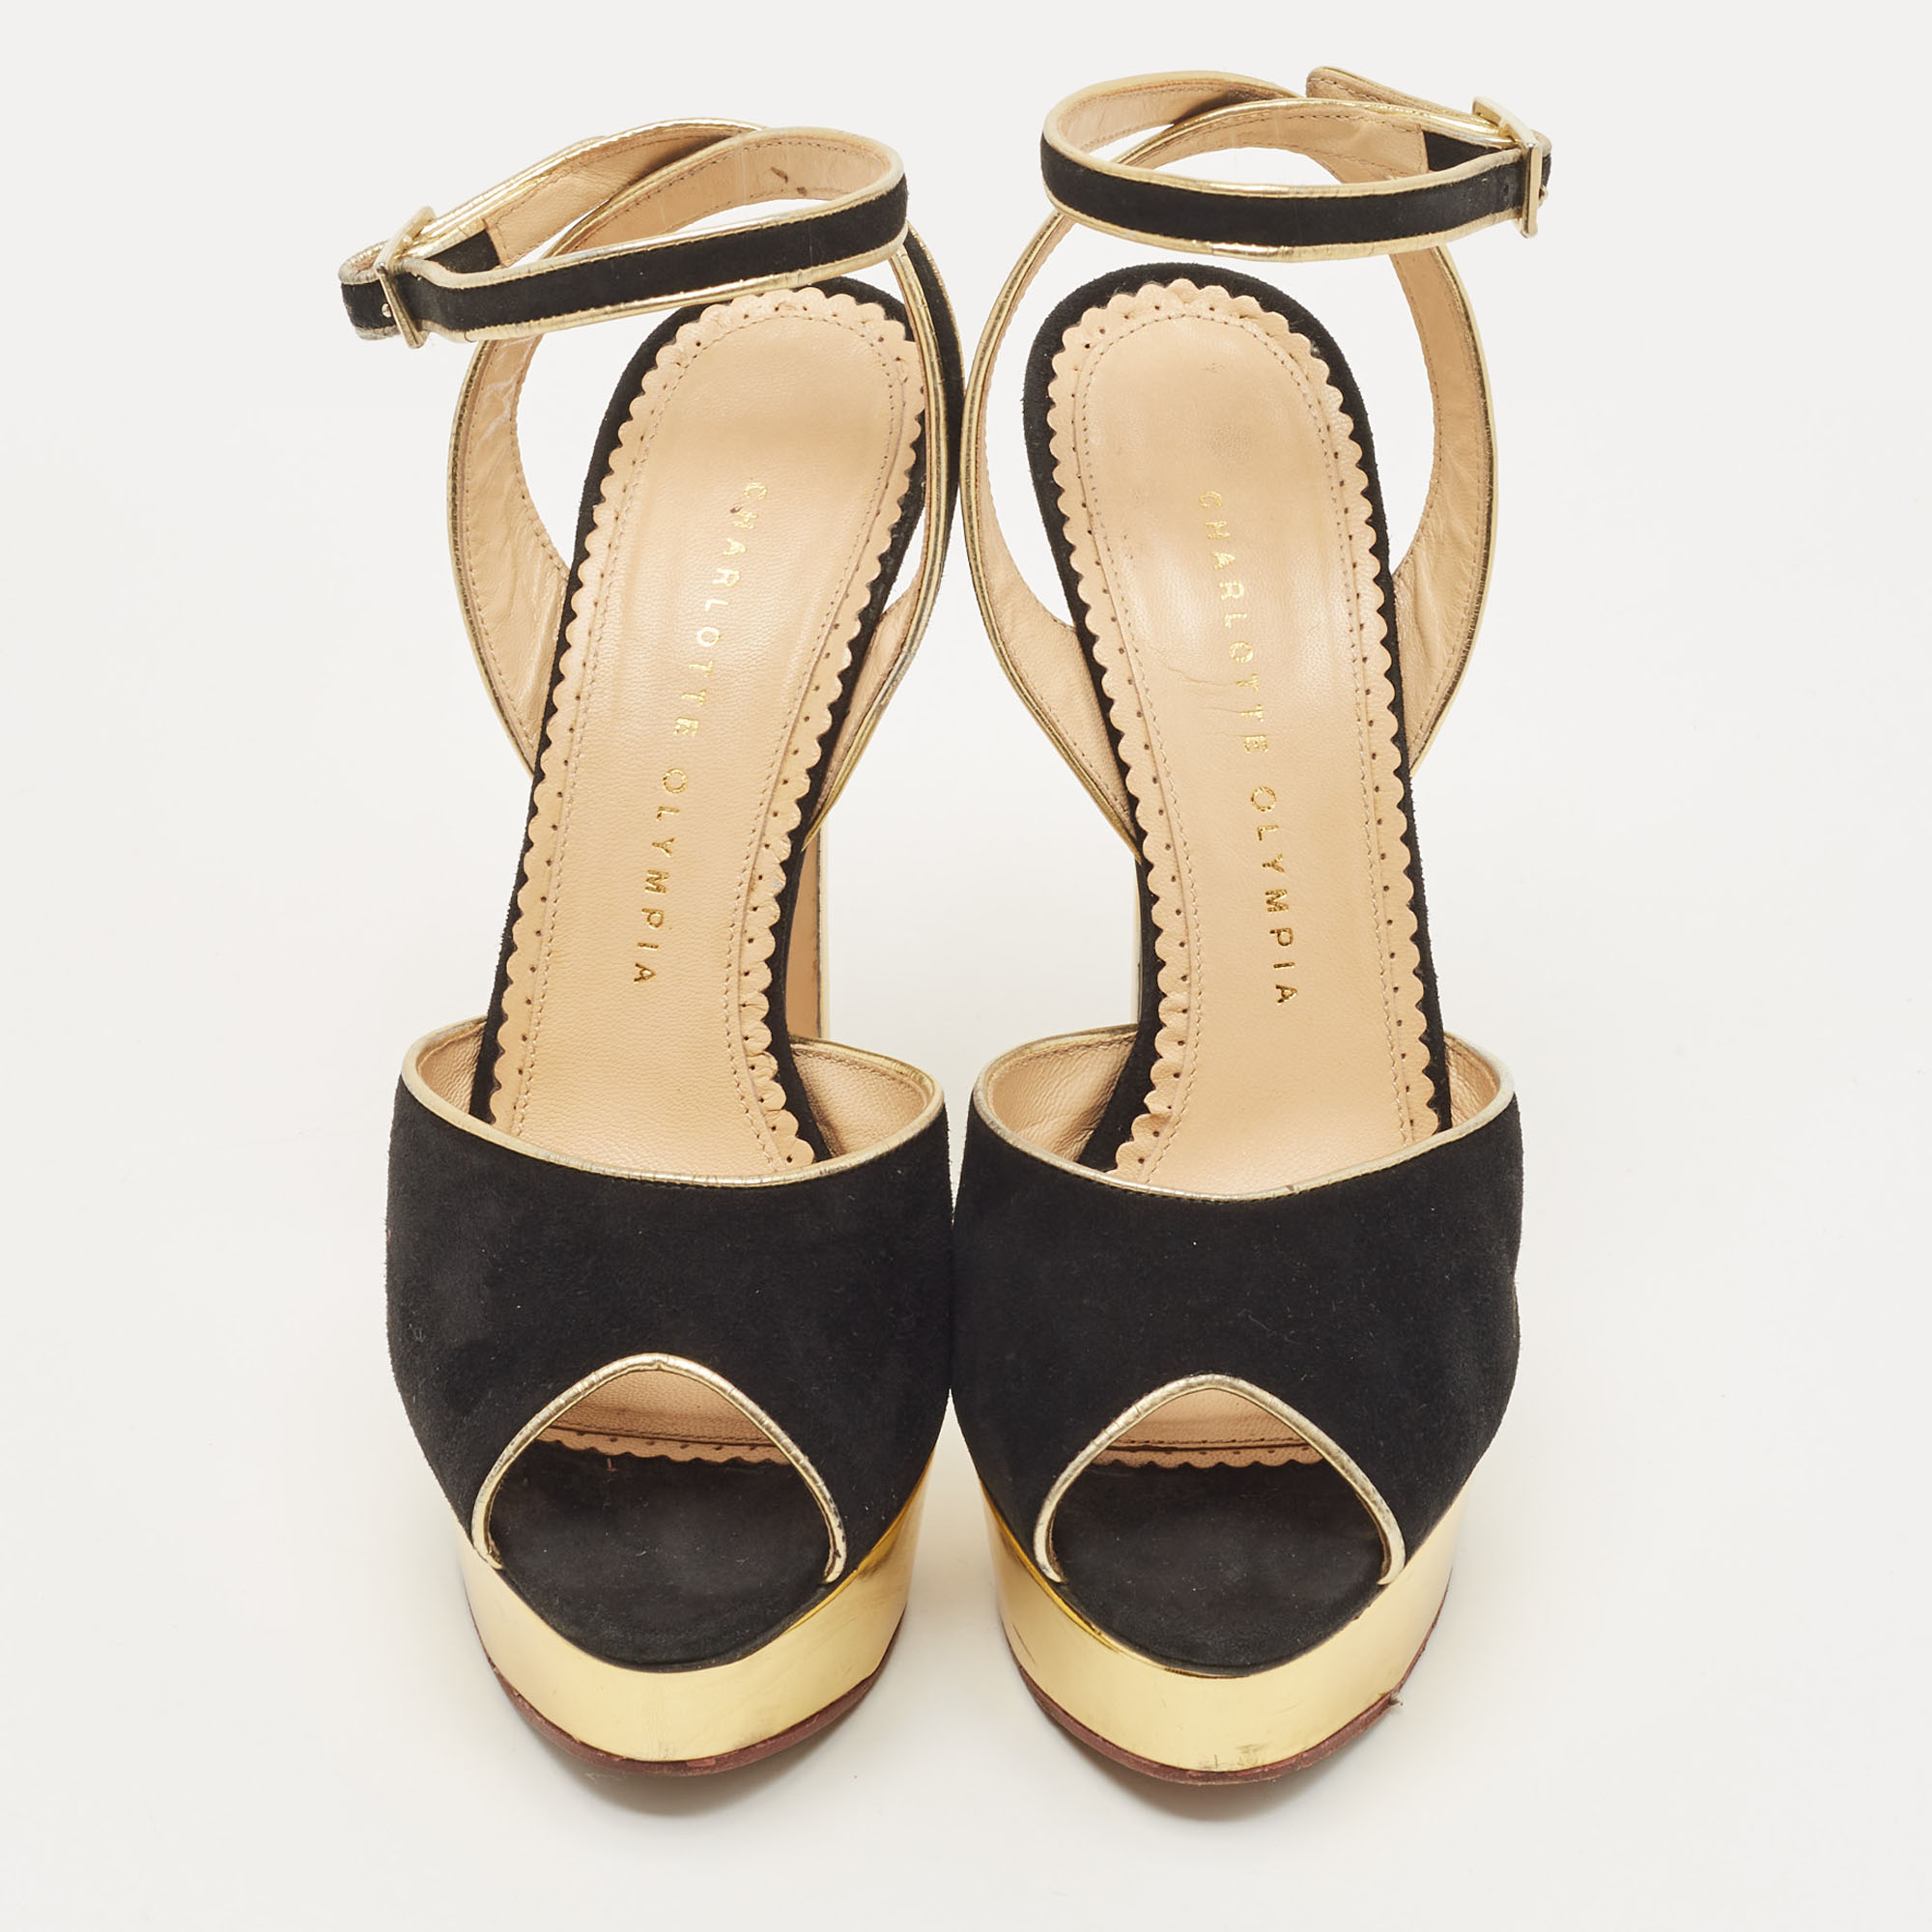 Charlotte Olympia Black Suede And Leather Peep Toe Platform Sandals Size 38.5